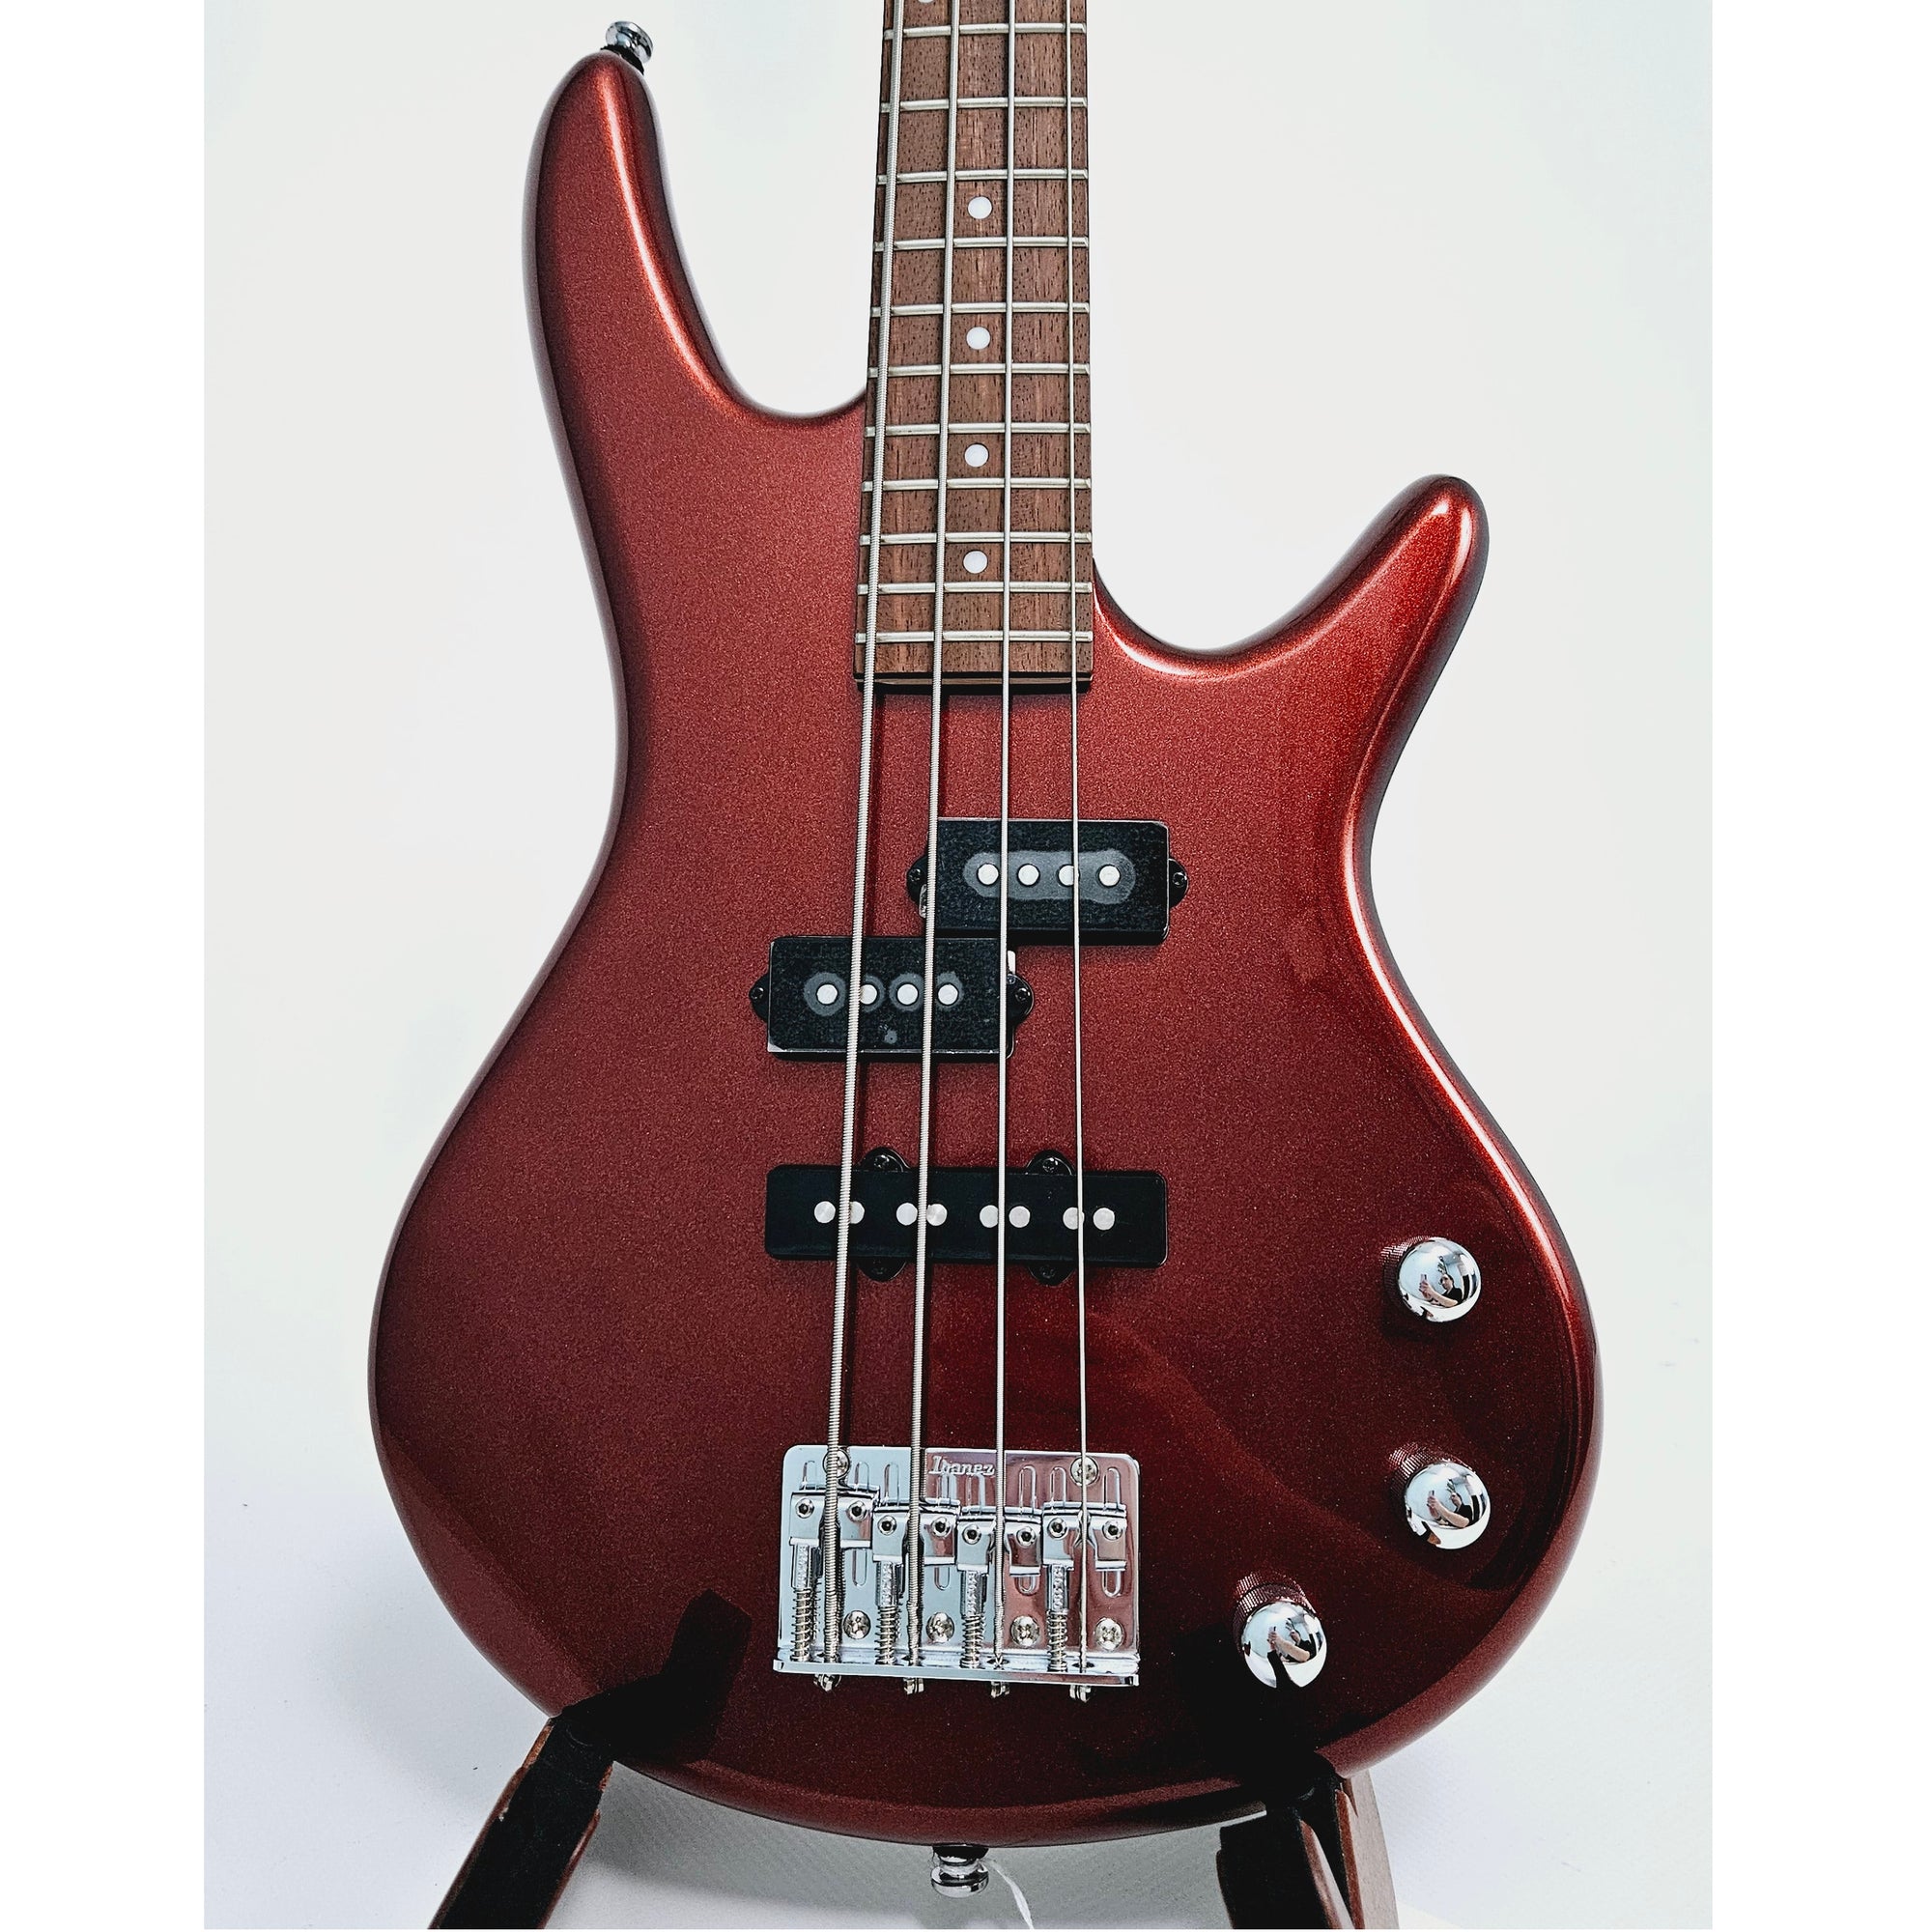 Ibanez GSRM20RBM Mikro 4-String Electric Bass - Root Beer Metallic Body Front